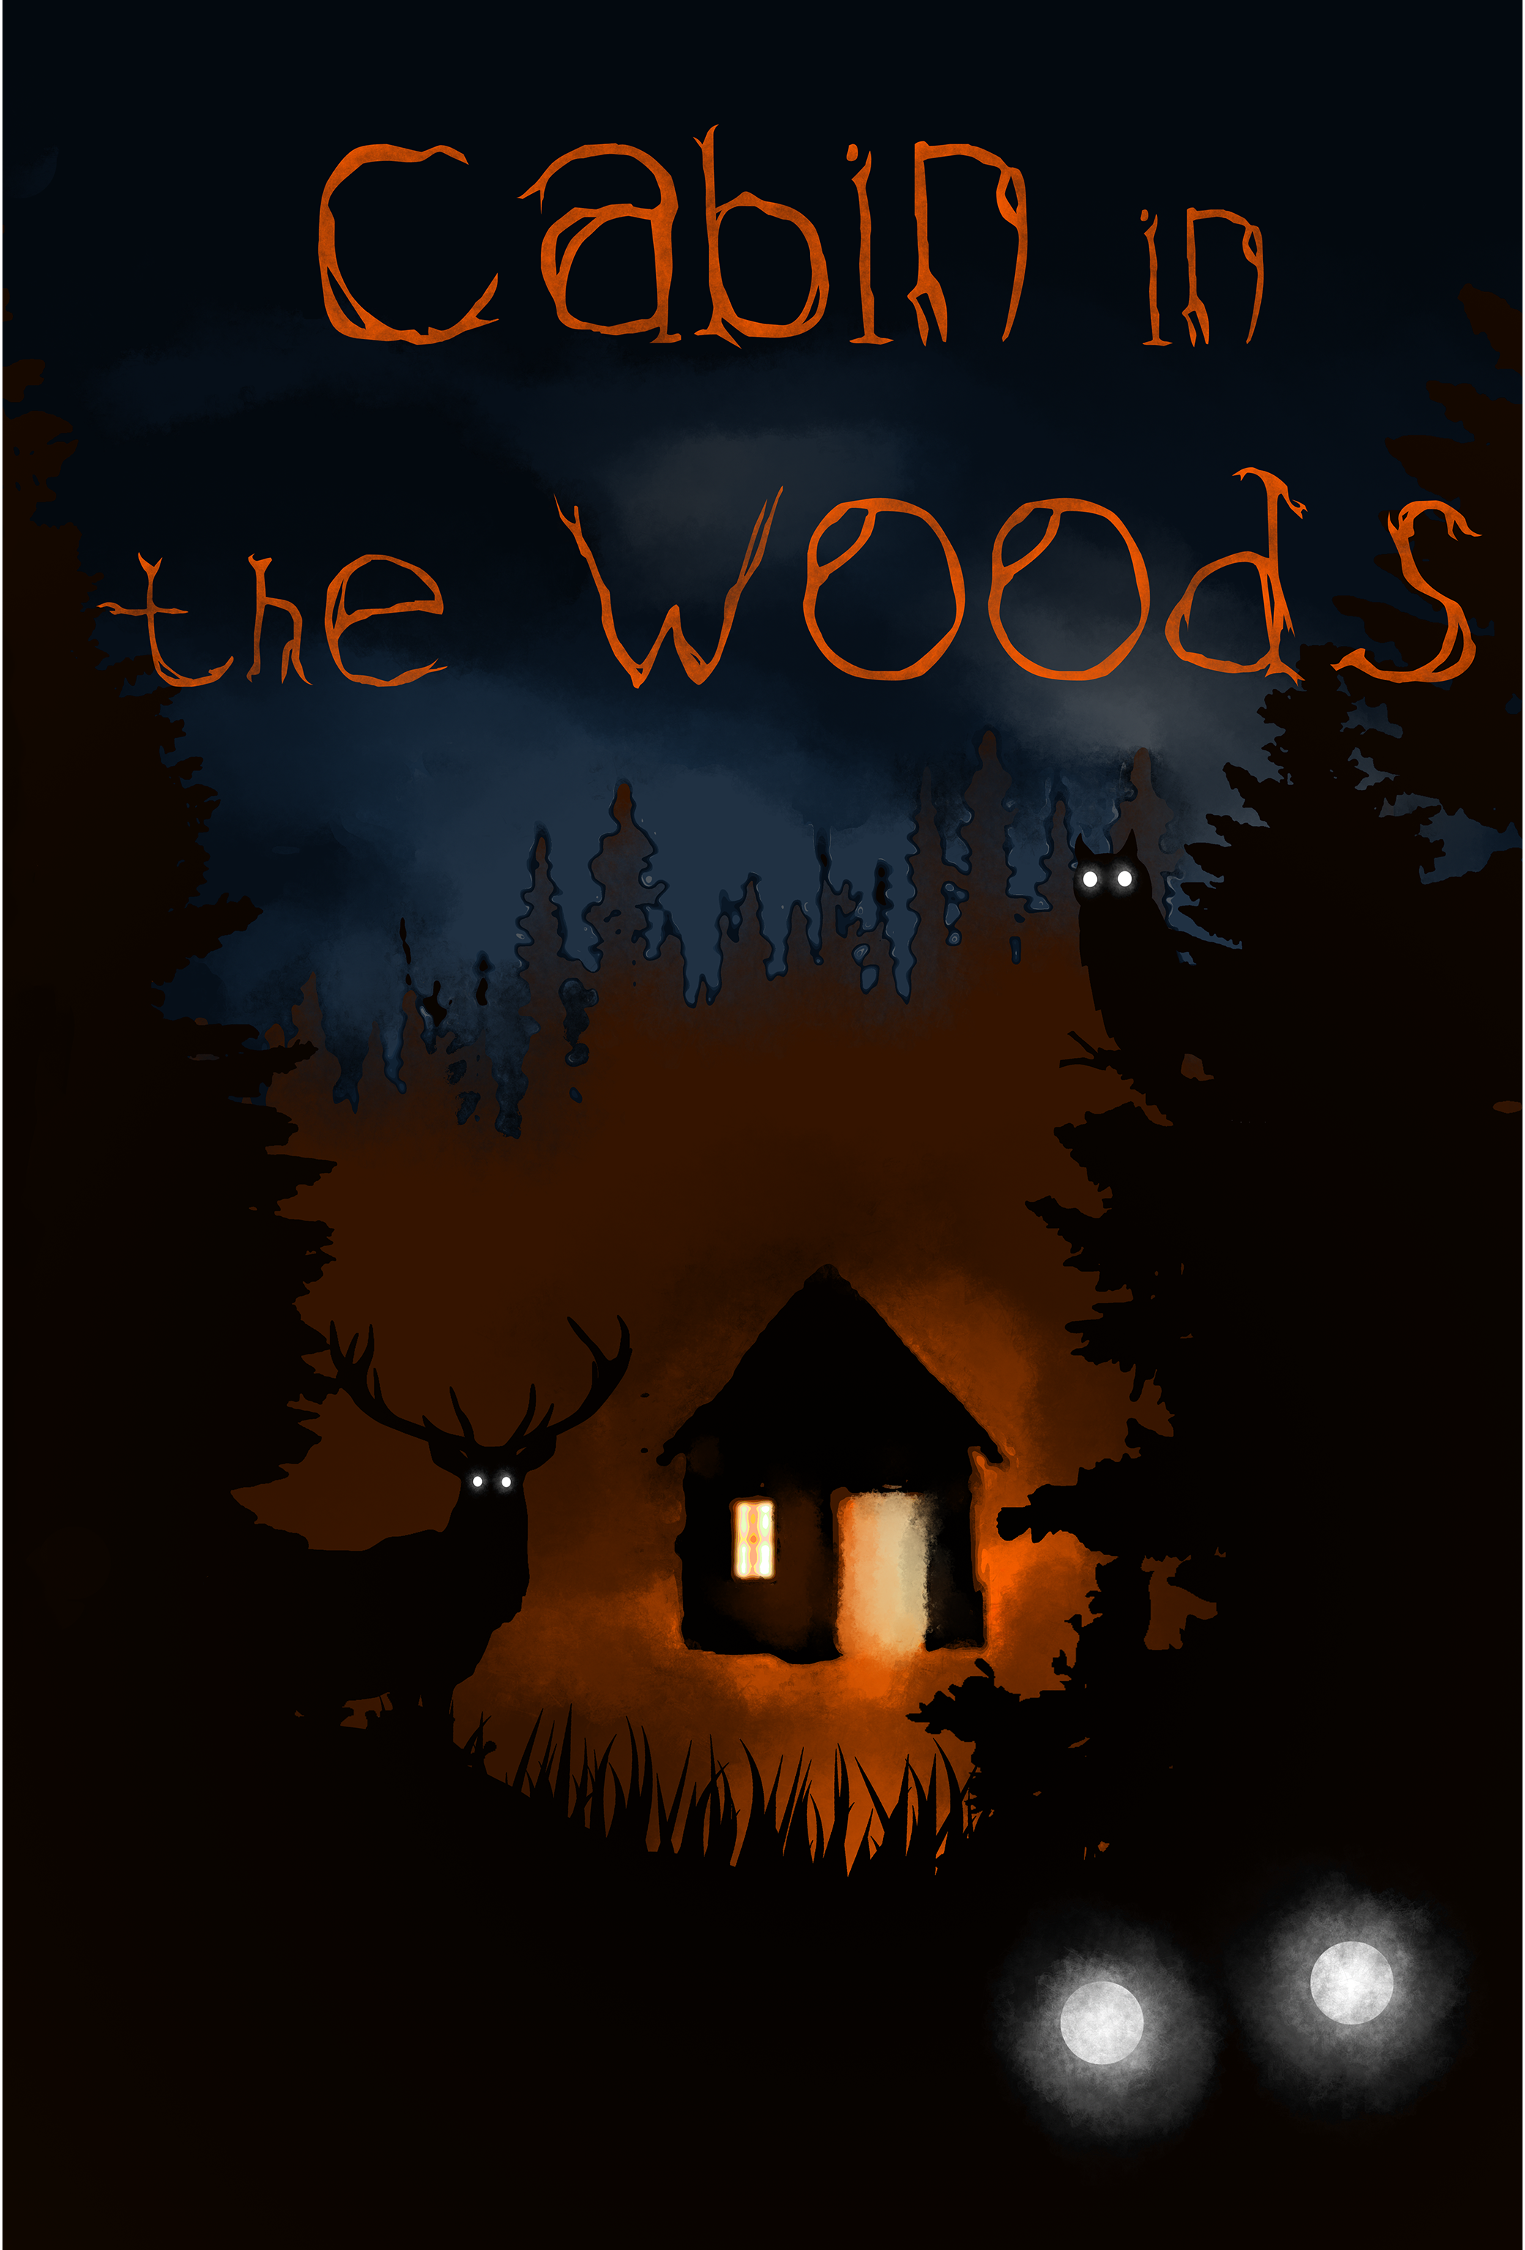 Logo for Cabin in the Woods Escape Room game depicting an old log cabin in a forest